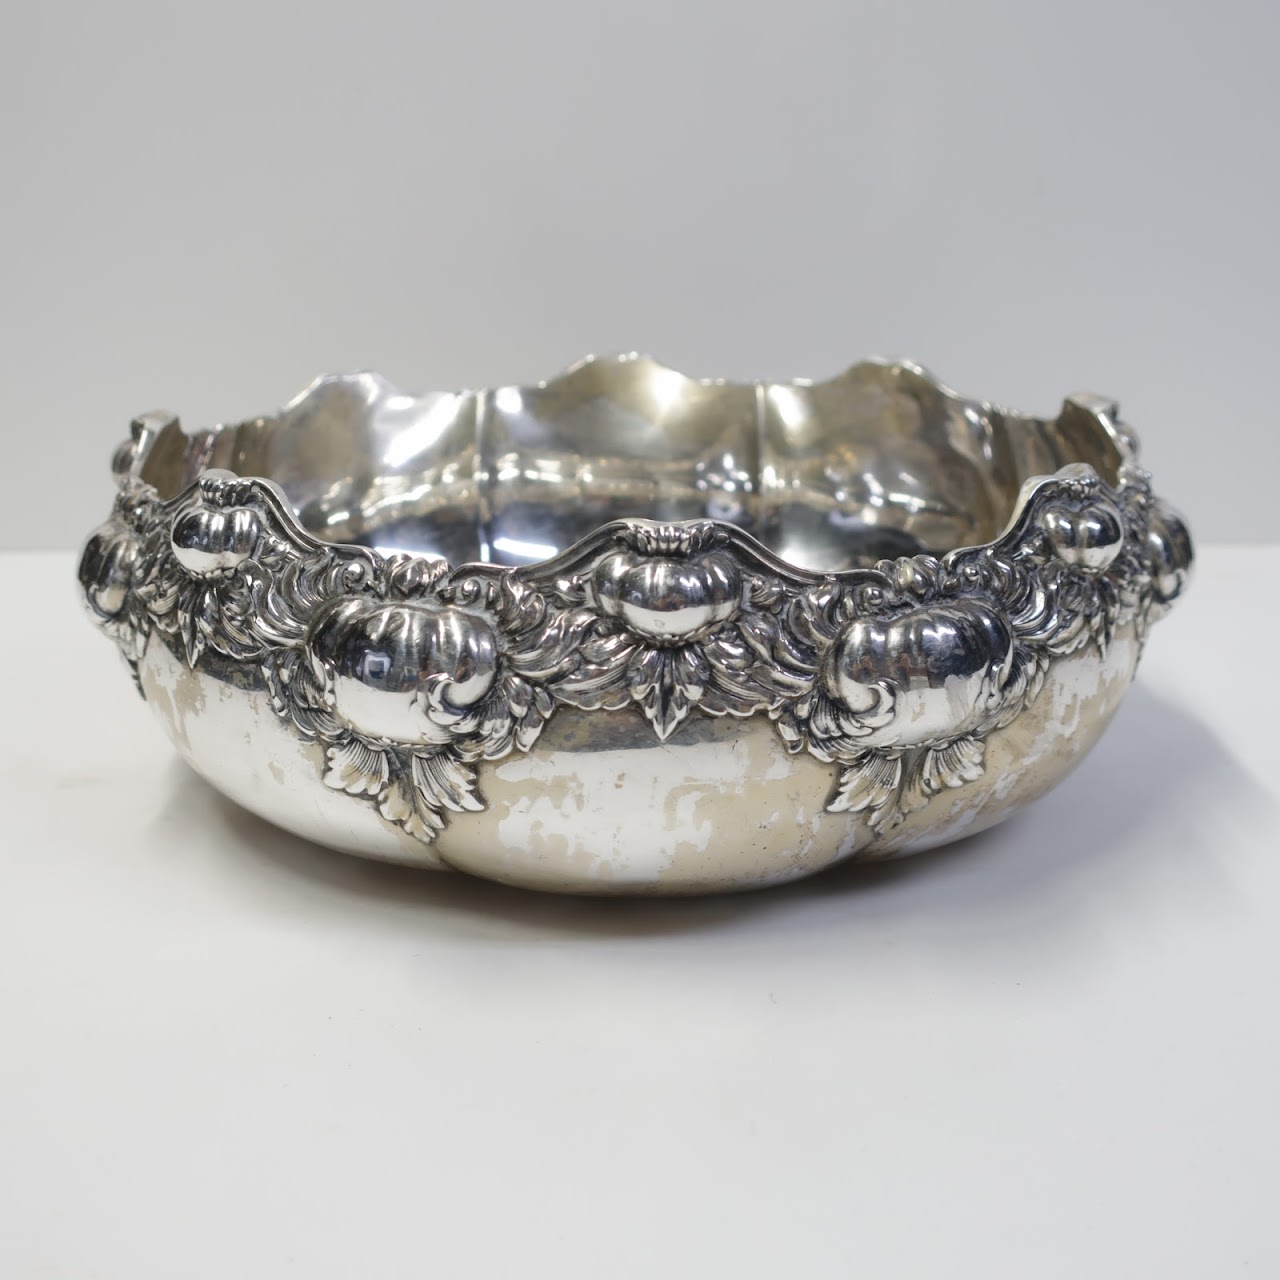 Tiffany & Co. Antique Sterling Silver Bowl